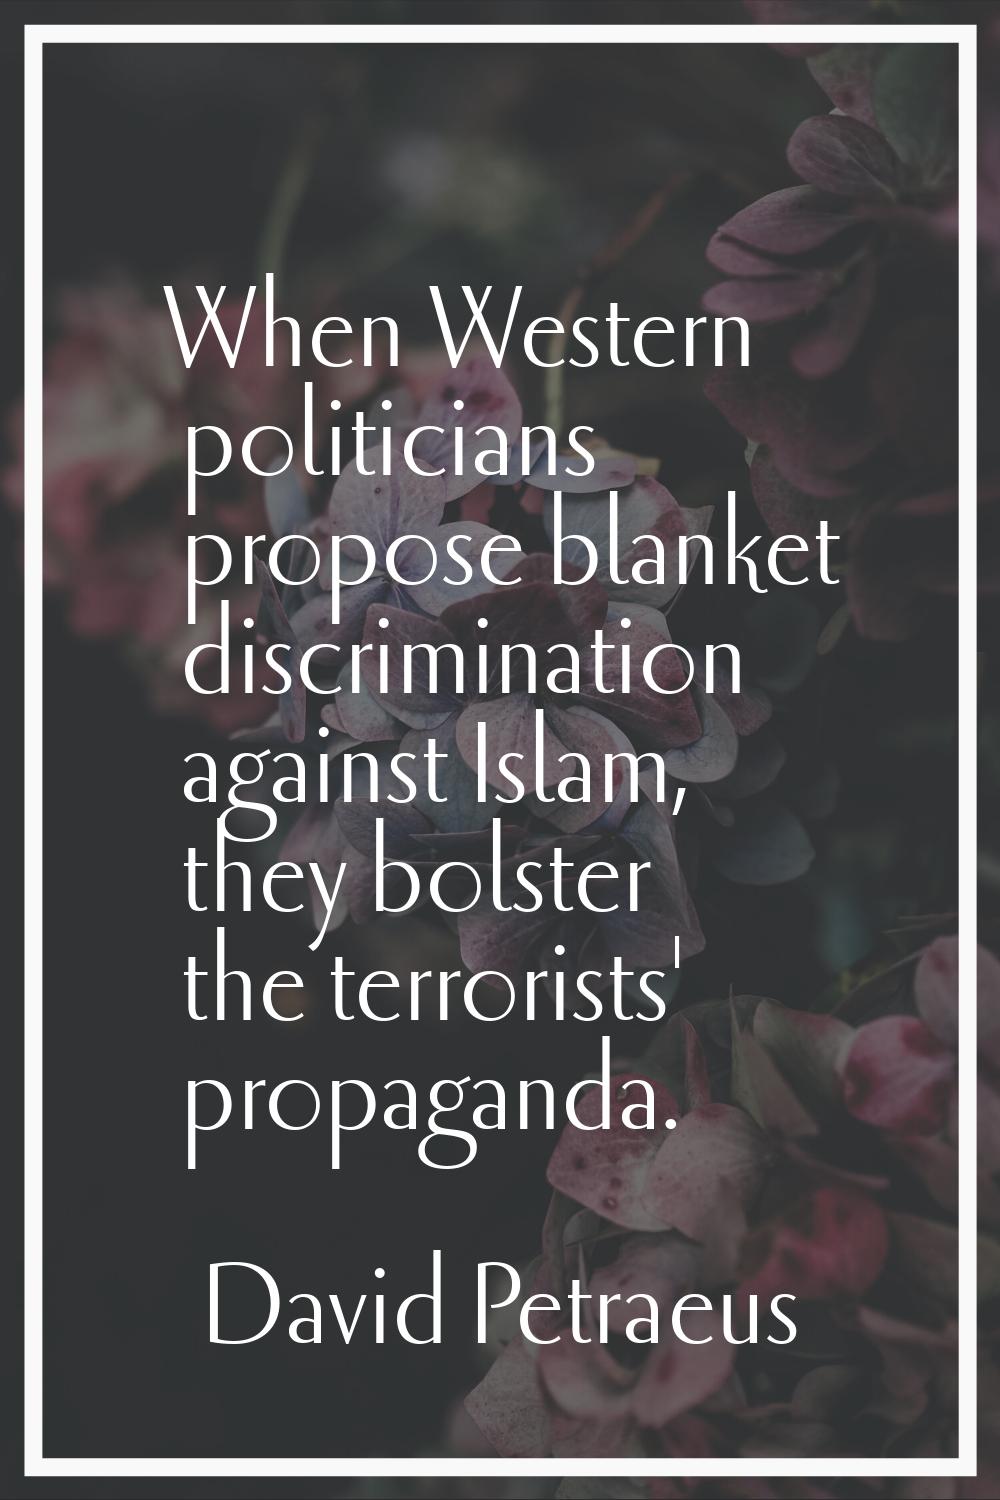 When Western politicians propose blanket discrimination against Islam, they bolster the terrorists'